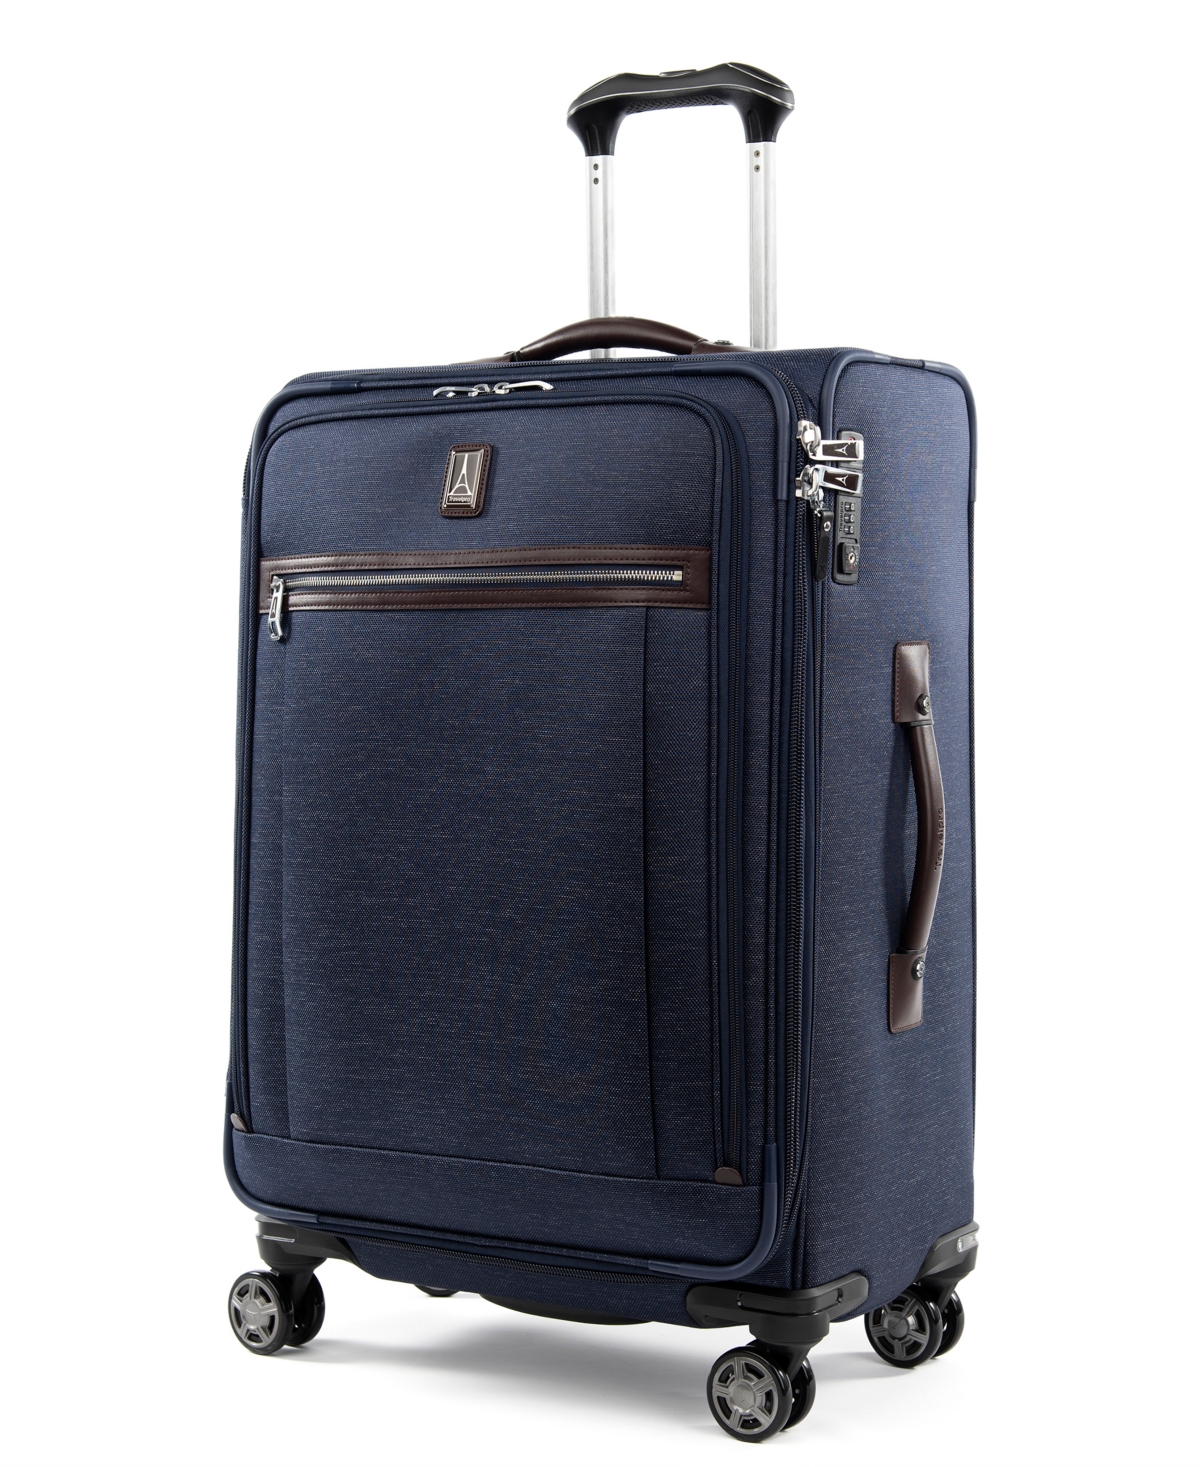 Platinum Elite Limited Edition 25" Softside Check-In Luggage - Limited Edition True Navy